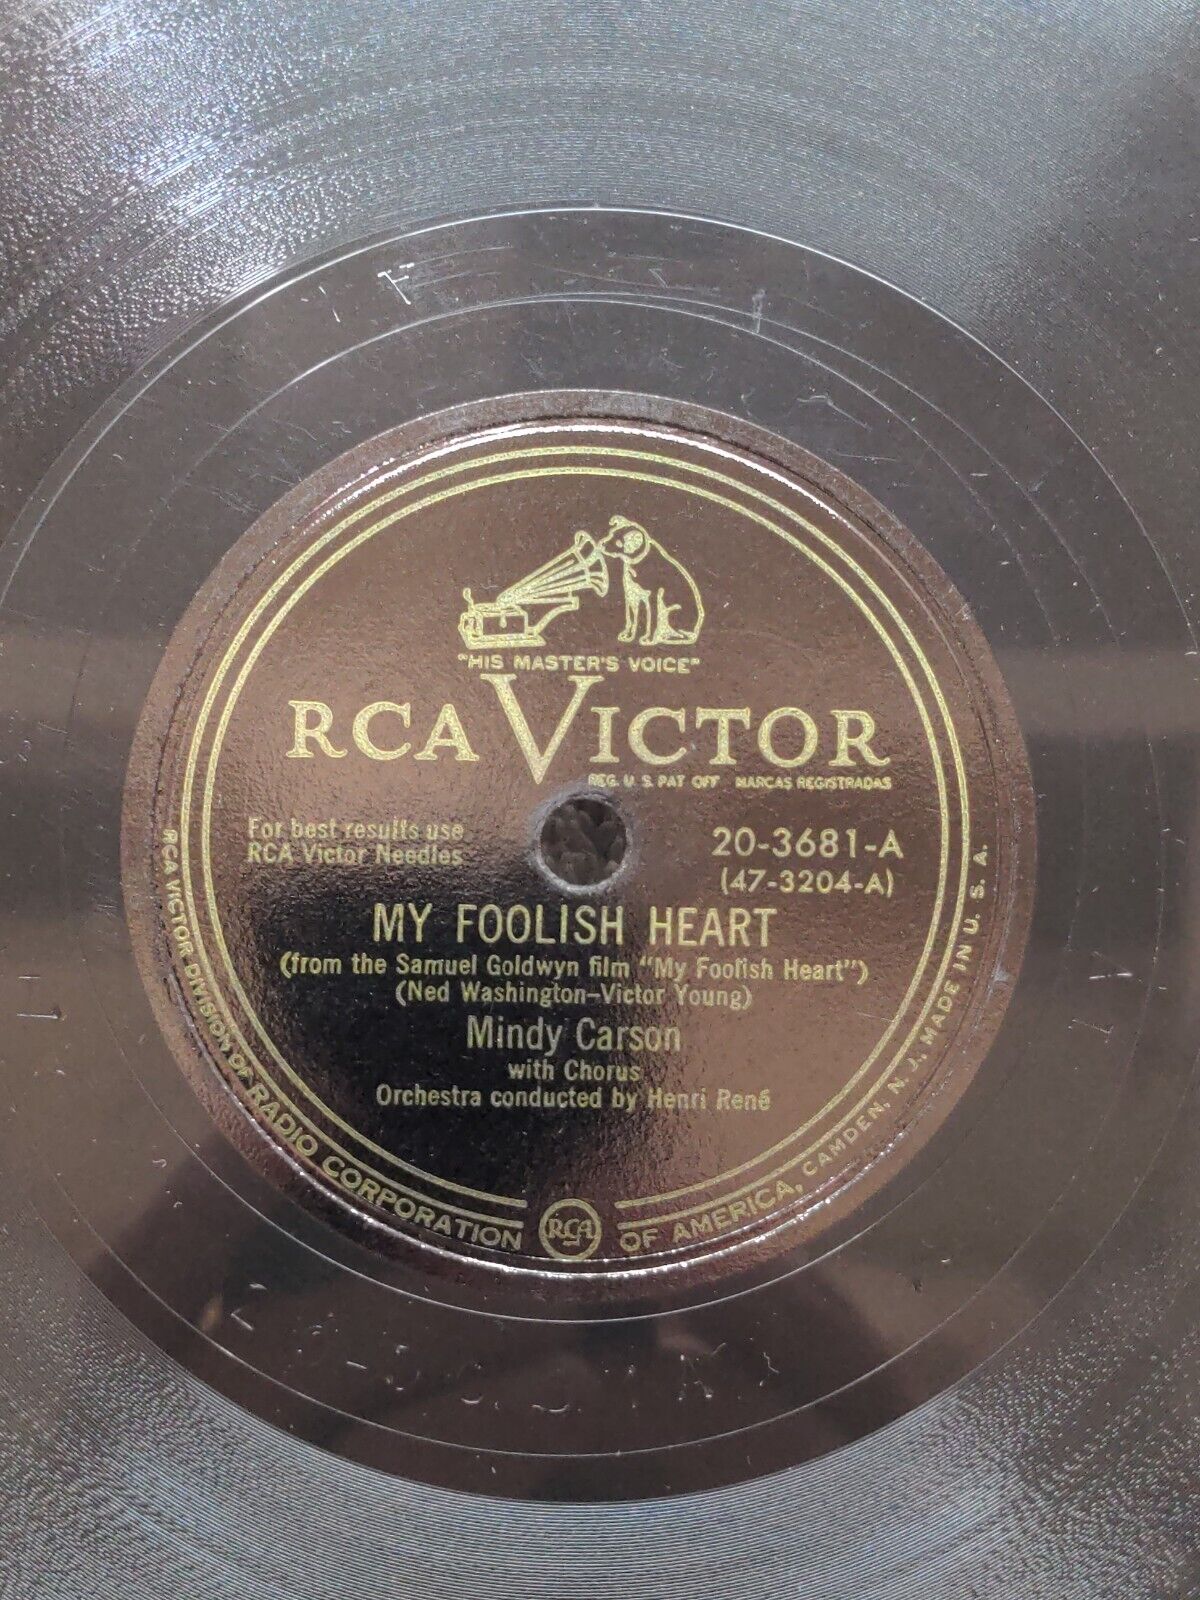 78 RPM My Foolish Heart Candy And Cake Mindy Carson RCA Victor 20-3681 A19